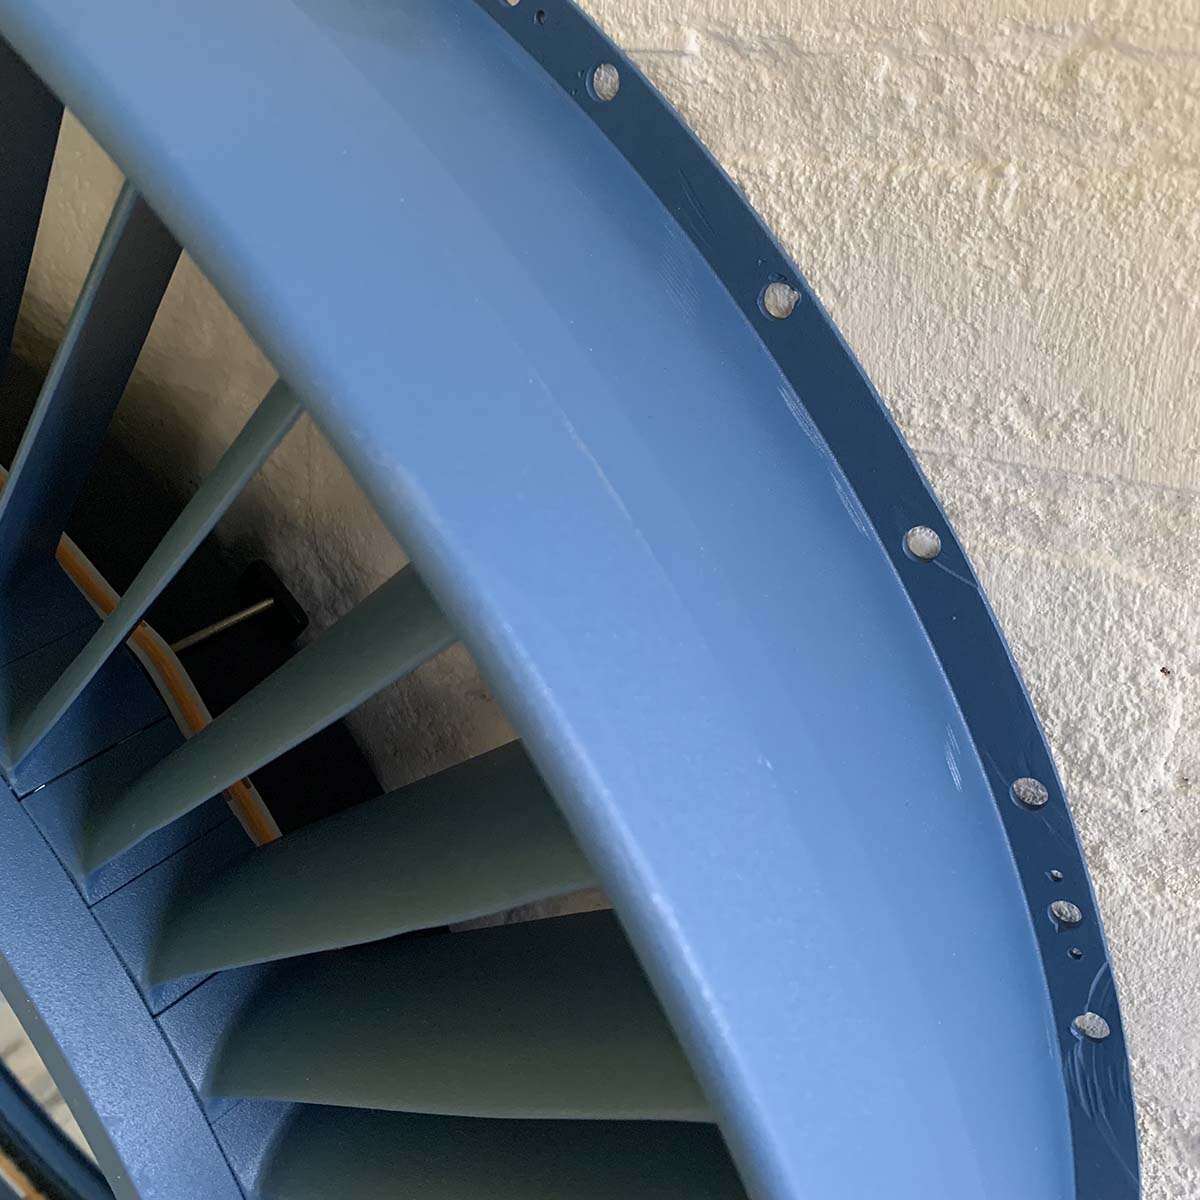 Photo showing the side of a Pratt & Whitney JT8D stator mirror.